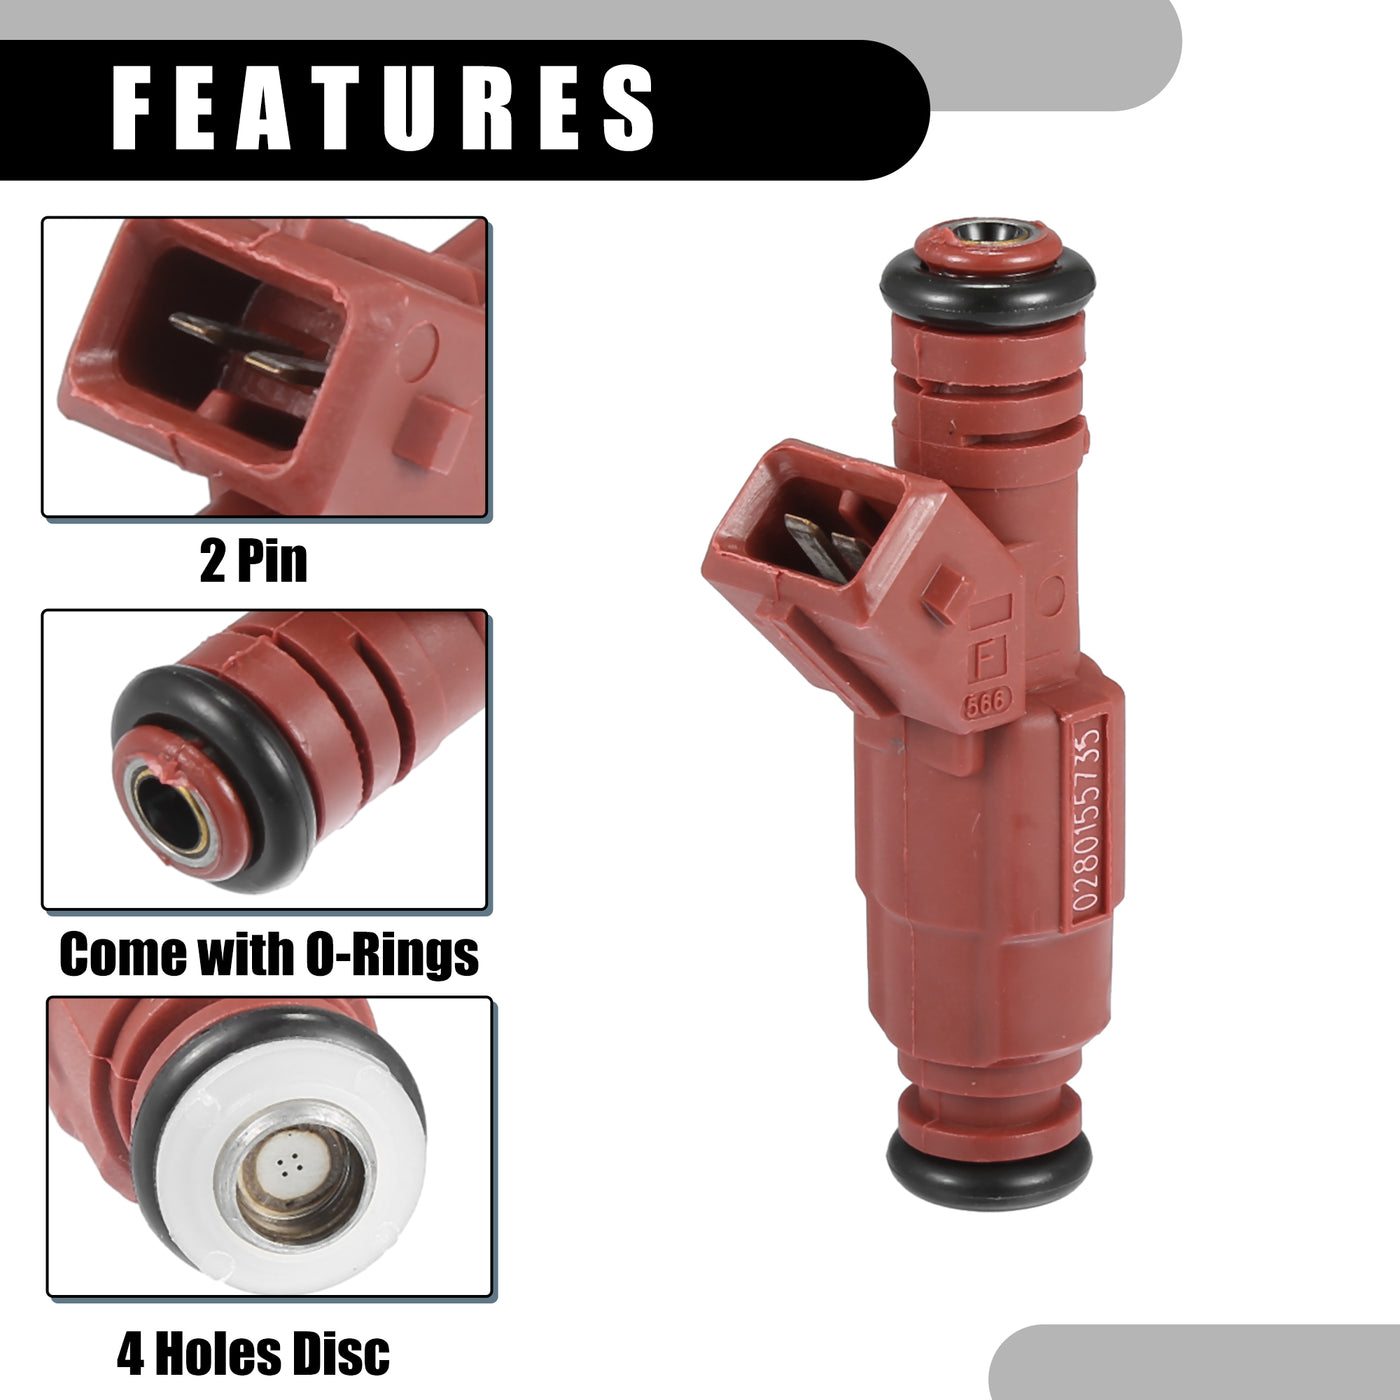 Partuto Fuel Injector - Car Inner 4 Holes Engnie Fuel Injectors - for Ford Explorer 1997-1998 Metal Red - 6 Pcs